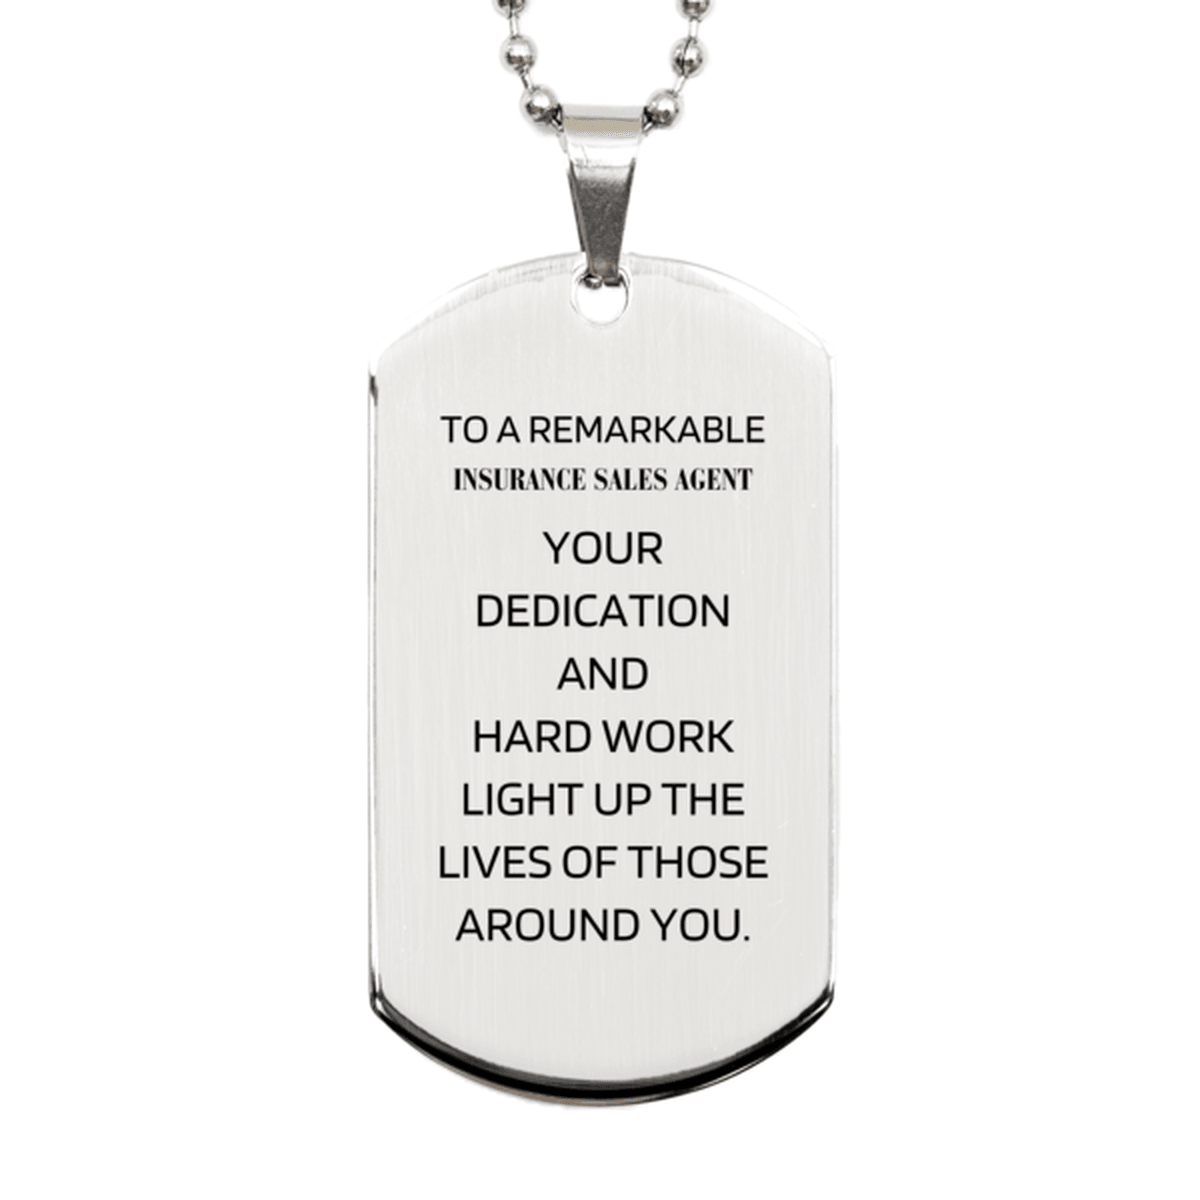 Remarkable Insurance Sales Agent Gifts, Your dedication and hard work, Inspirational Birthday Christmas Unique Silver Dog Tag For Insurance Sales Agent, Coworkers, Men, Women, Friends - Mallard Moon Gift Shop